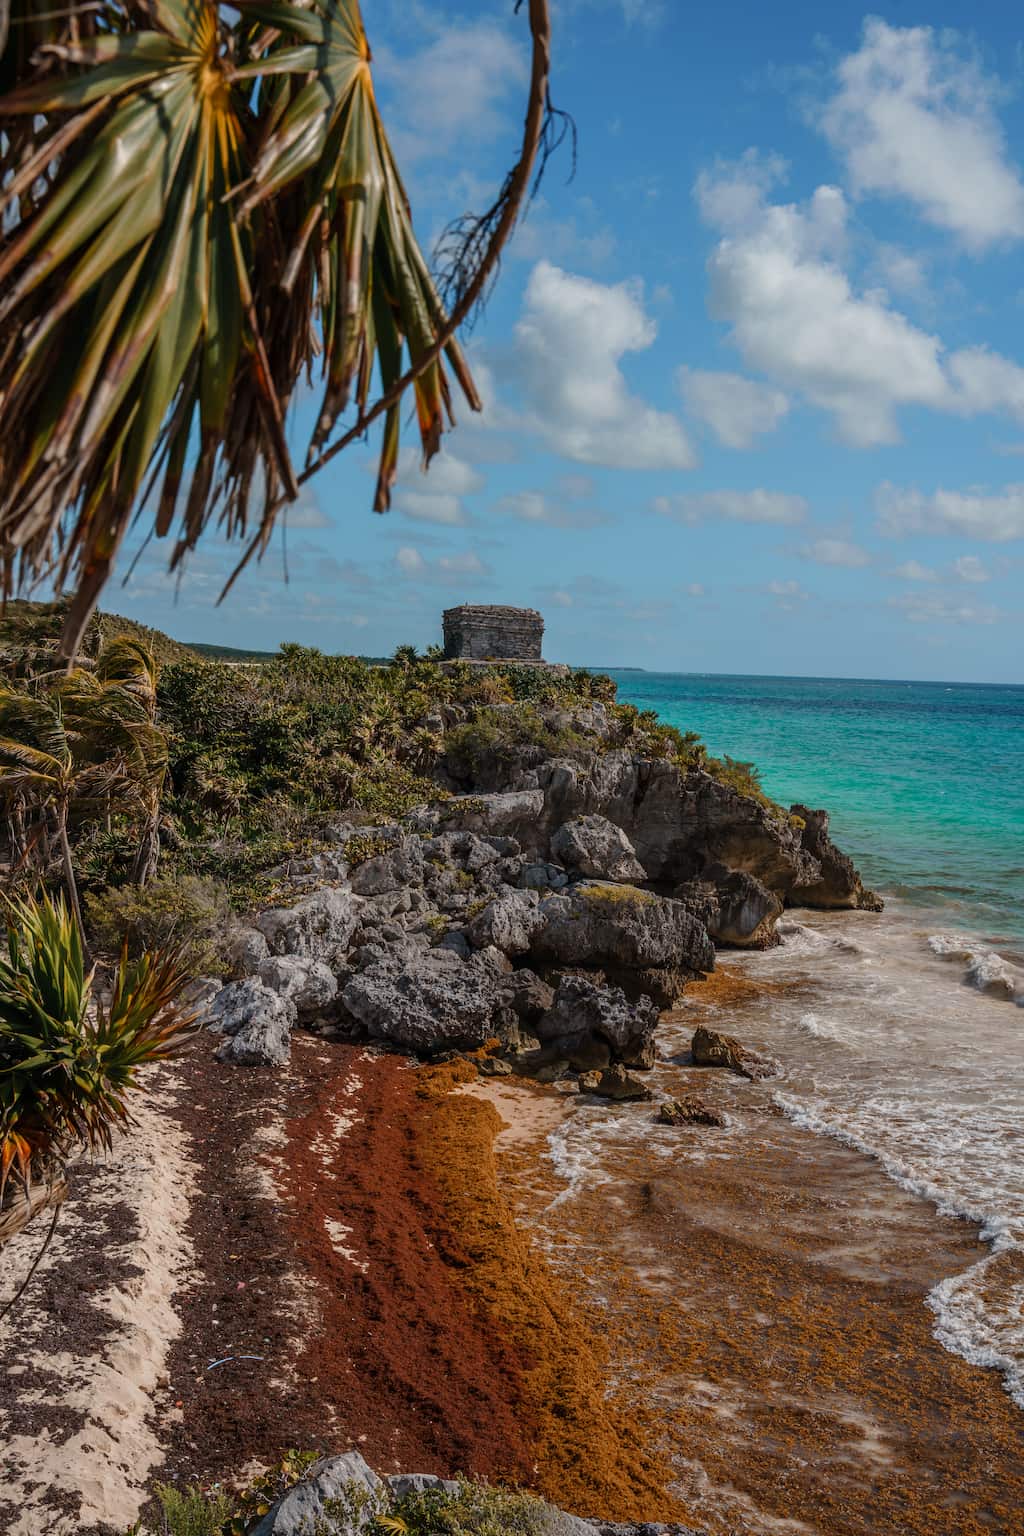 Most Tulum tours from Cancun will take you to the Mayan ruins.